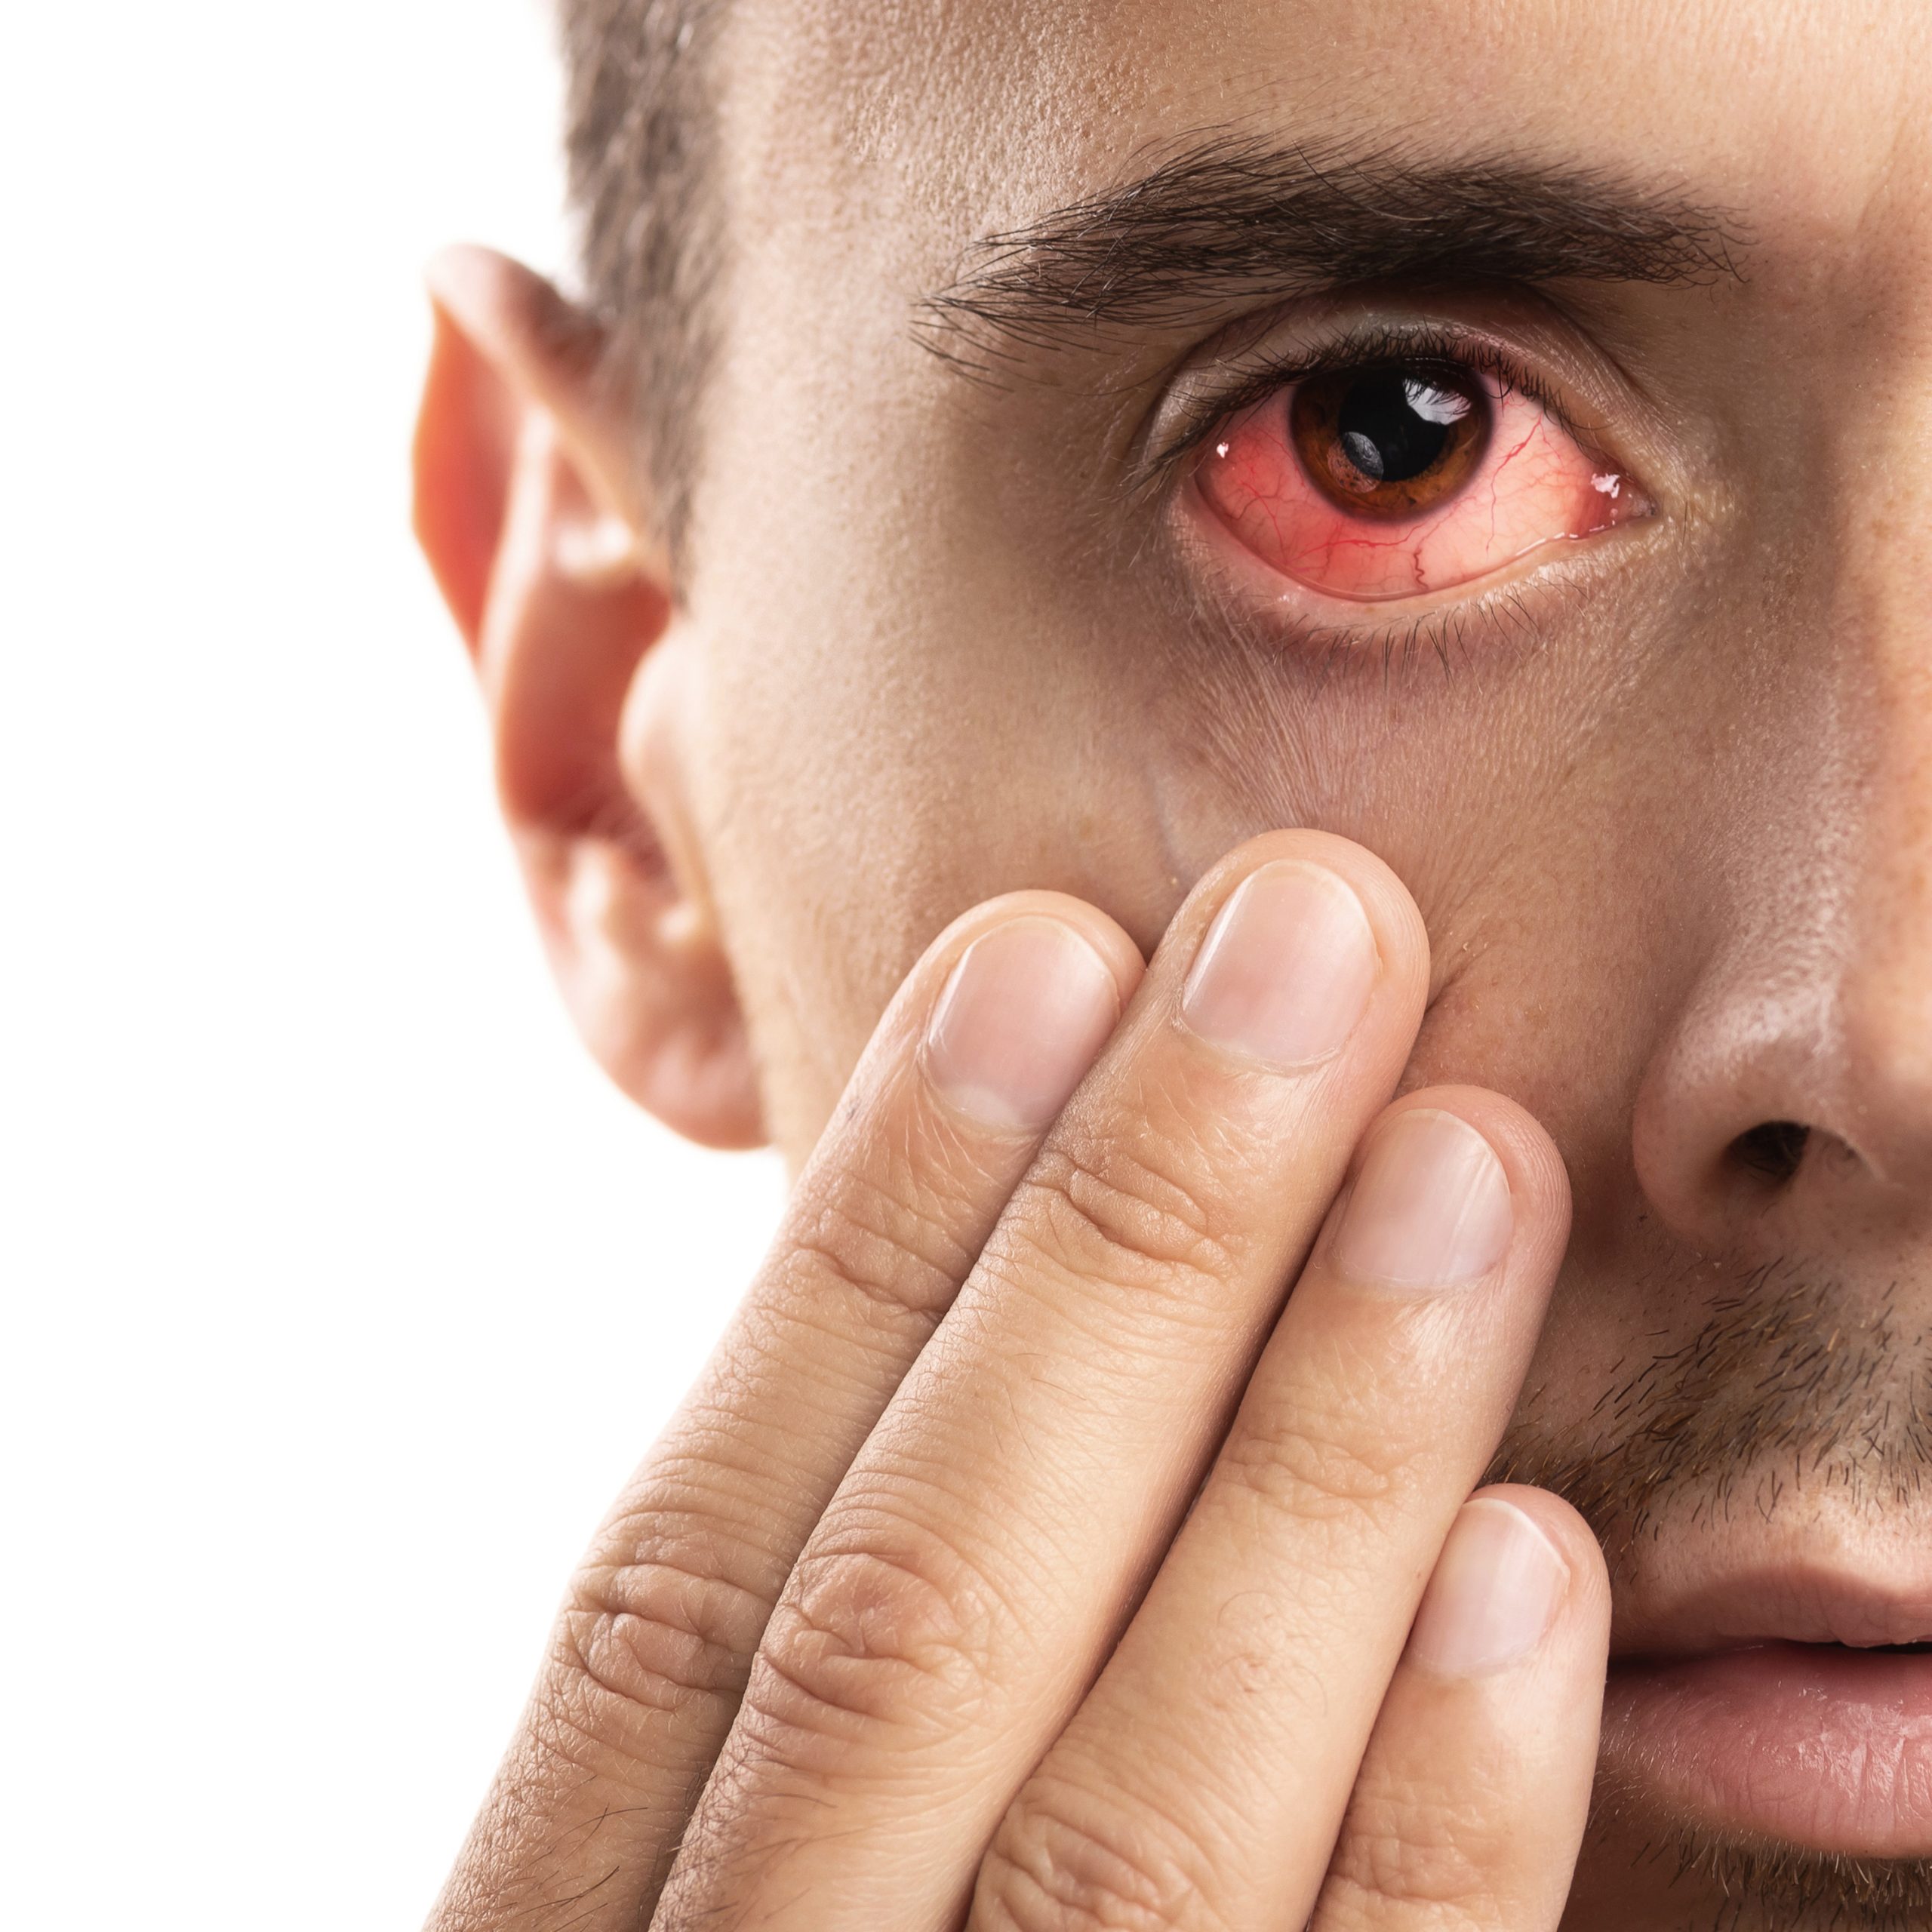 Chemical Eye Burn Causes, Symptoms, and Treatment Options